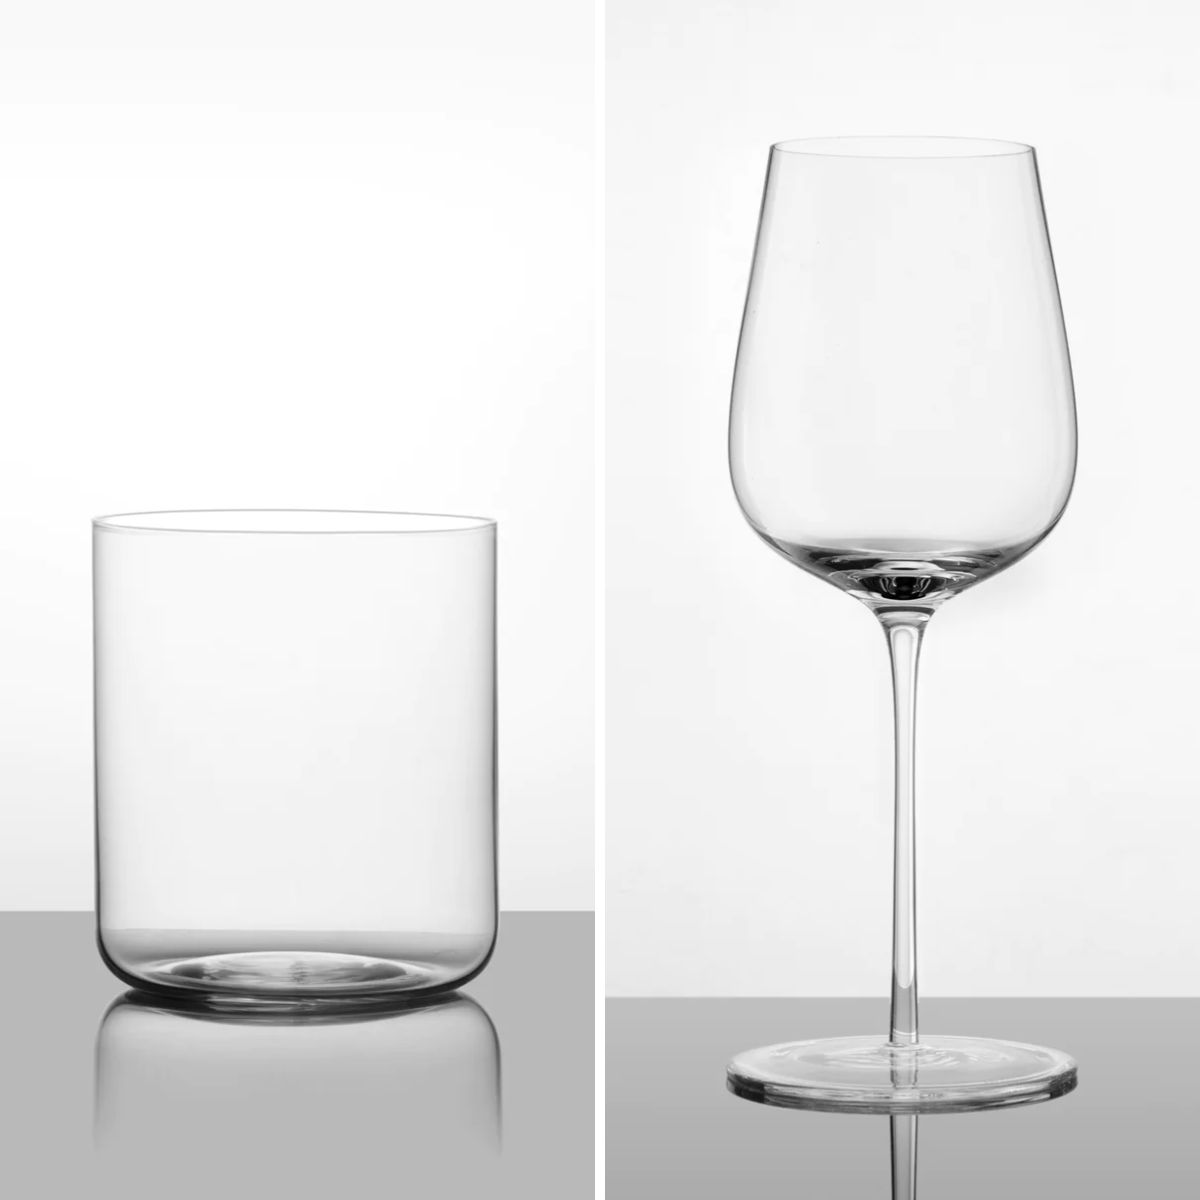 The Rocks and The Bordeaux, wedding stemware from Glasvin